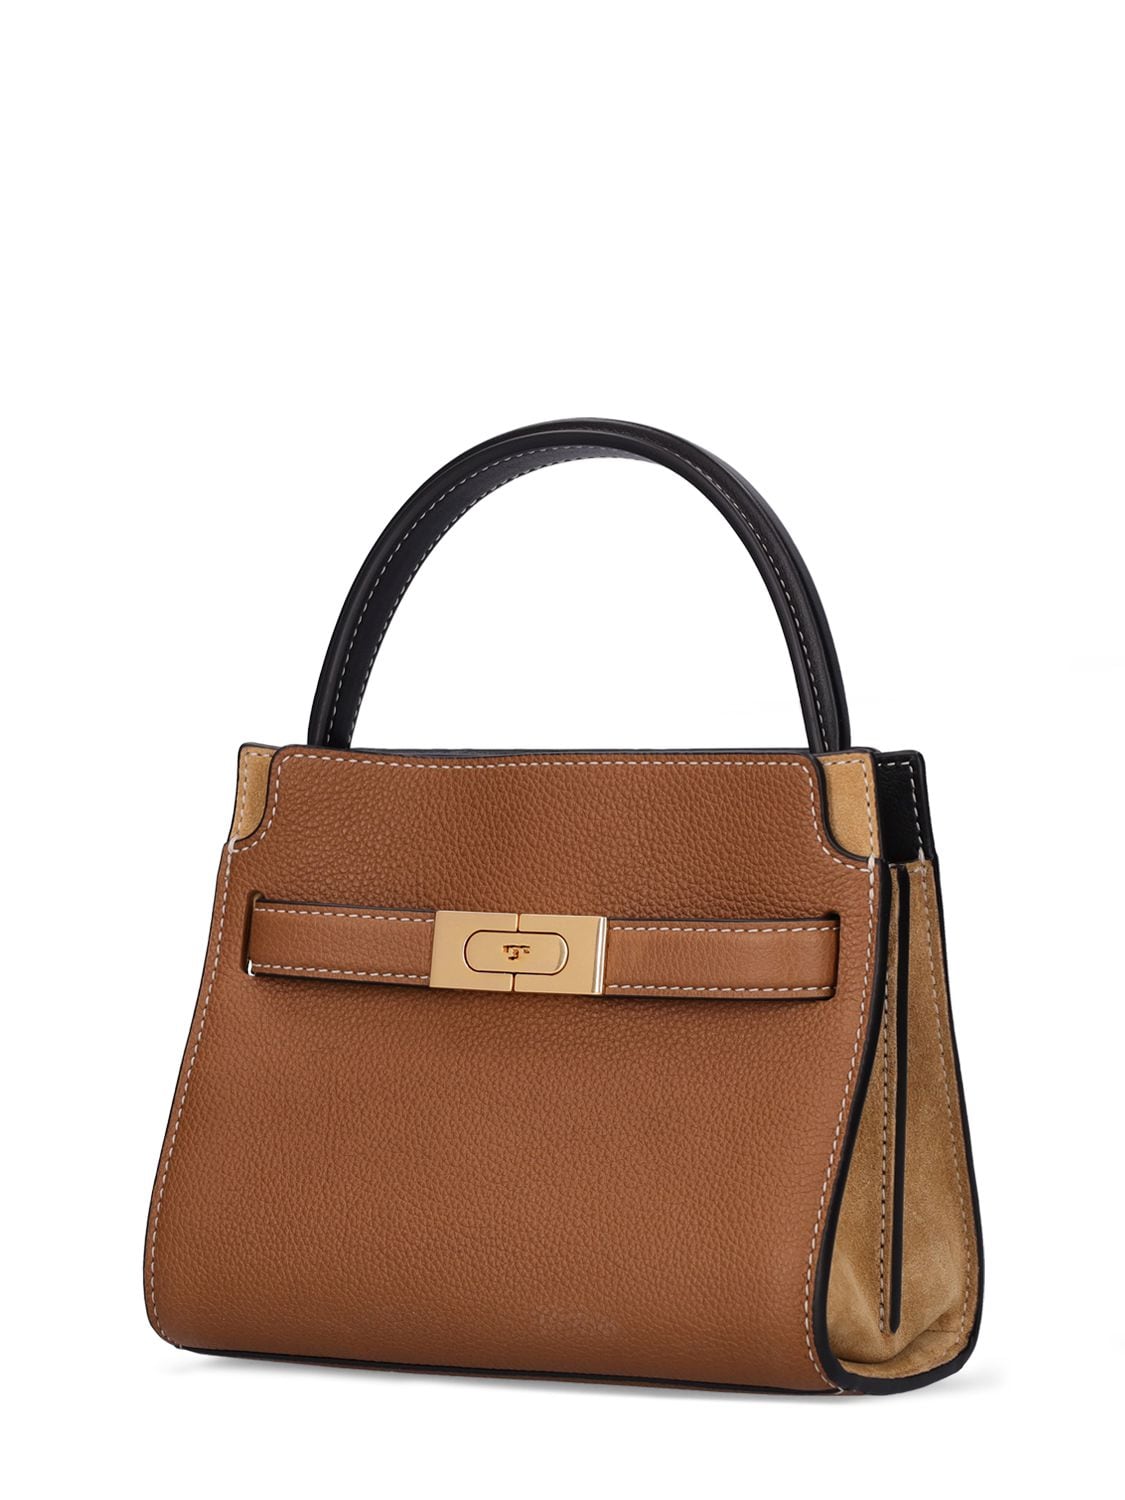 Shop Tory Burch Petite Double Lee Radziwill Pebbled Bag In Tigers Eye